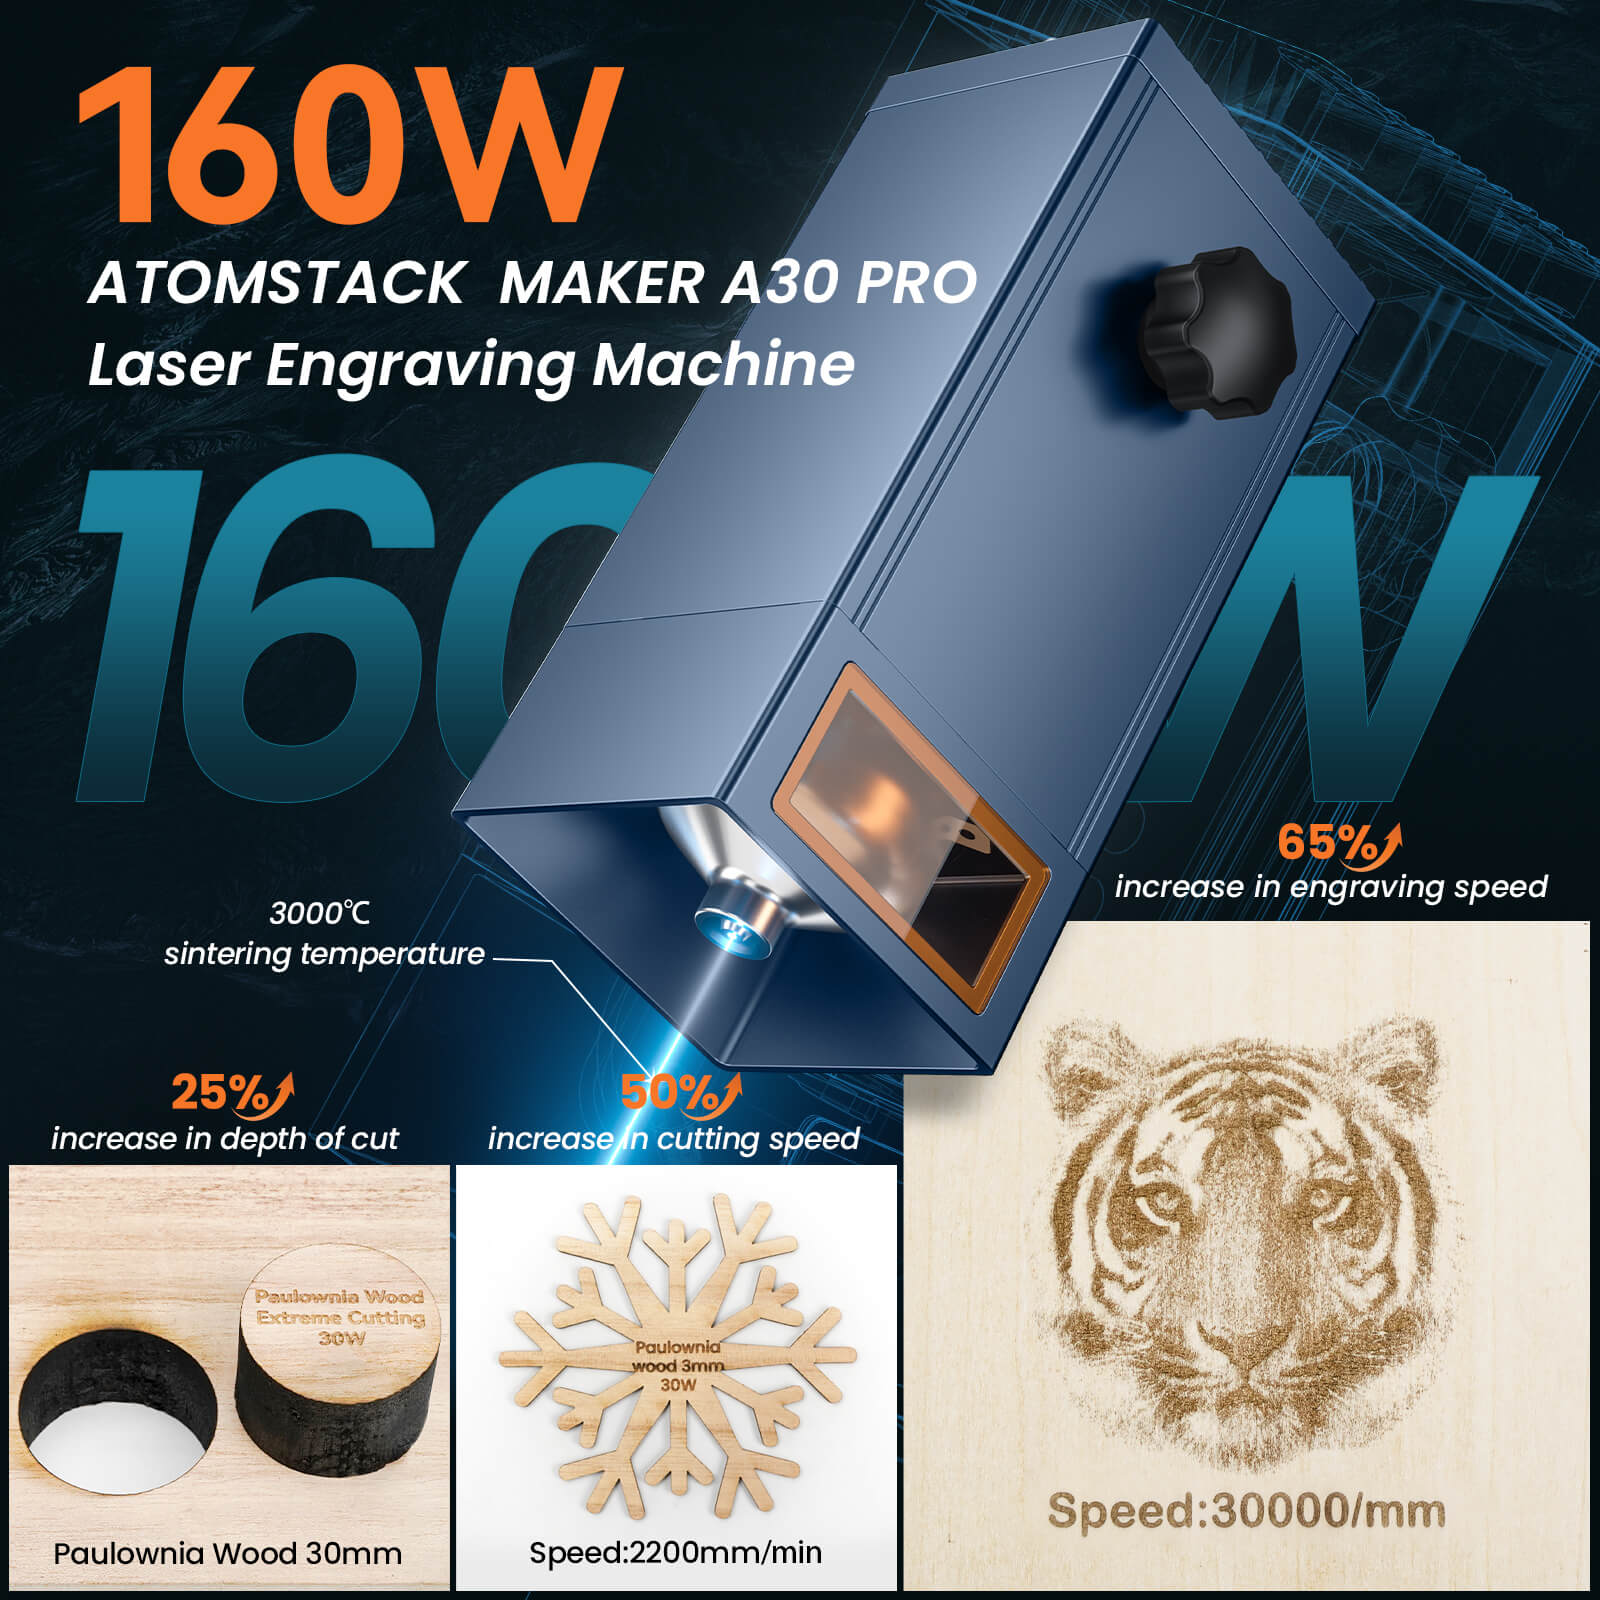 AtomStack A30 Pro Laser Engraving and Cutting Machine with F60 Air Assist Kit